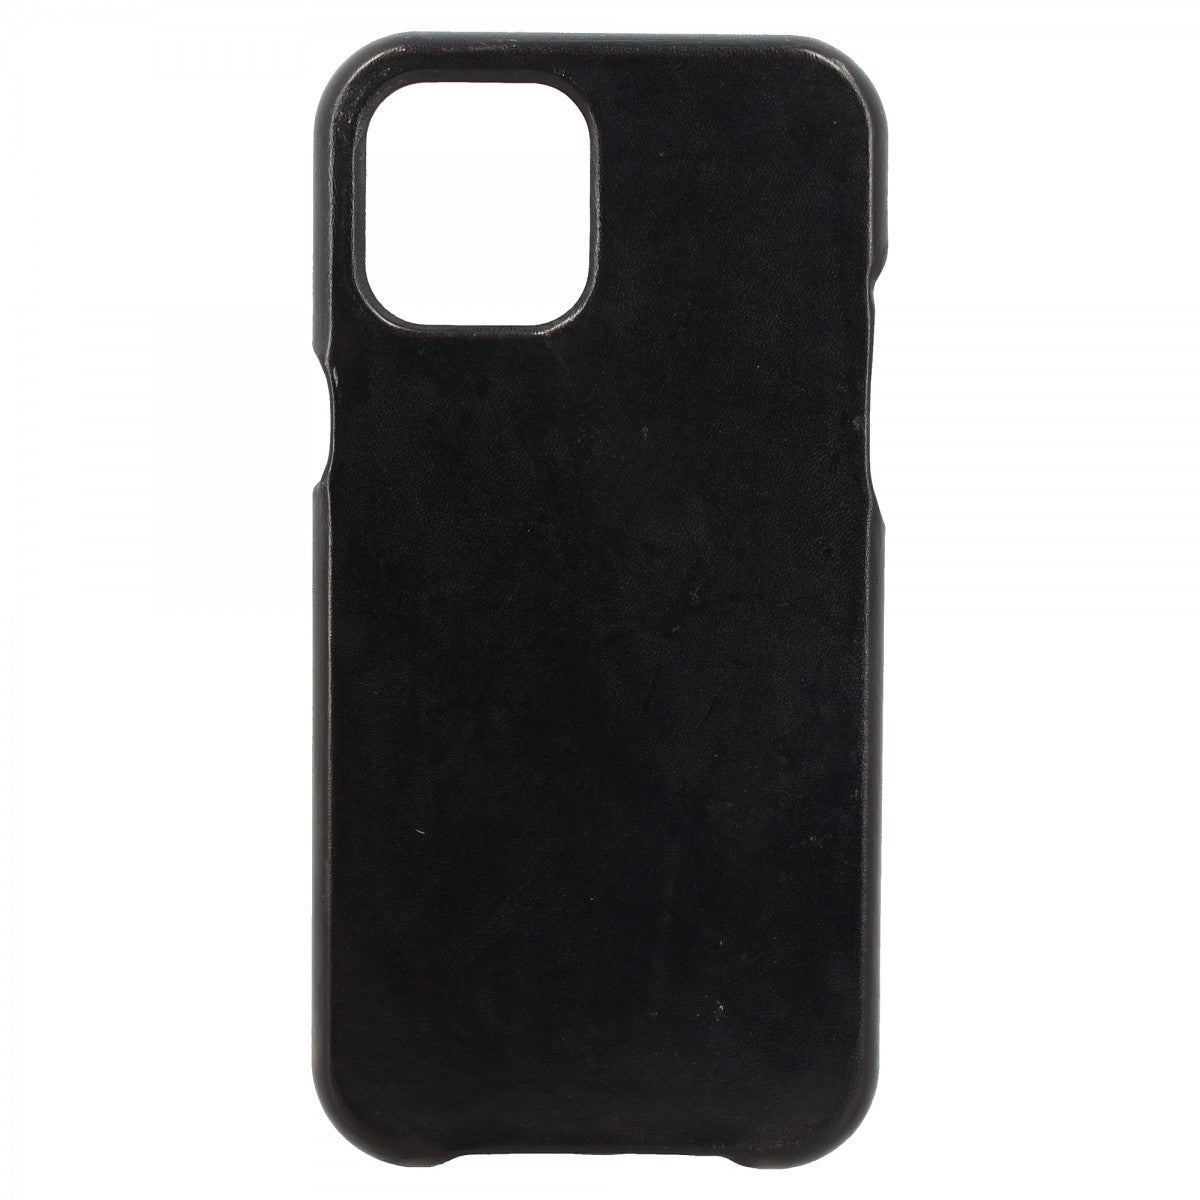 Cover iPhone in pelle nara tamponata a mano